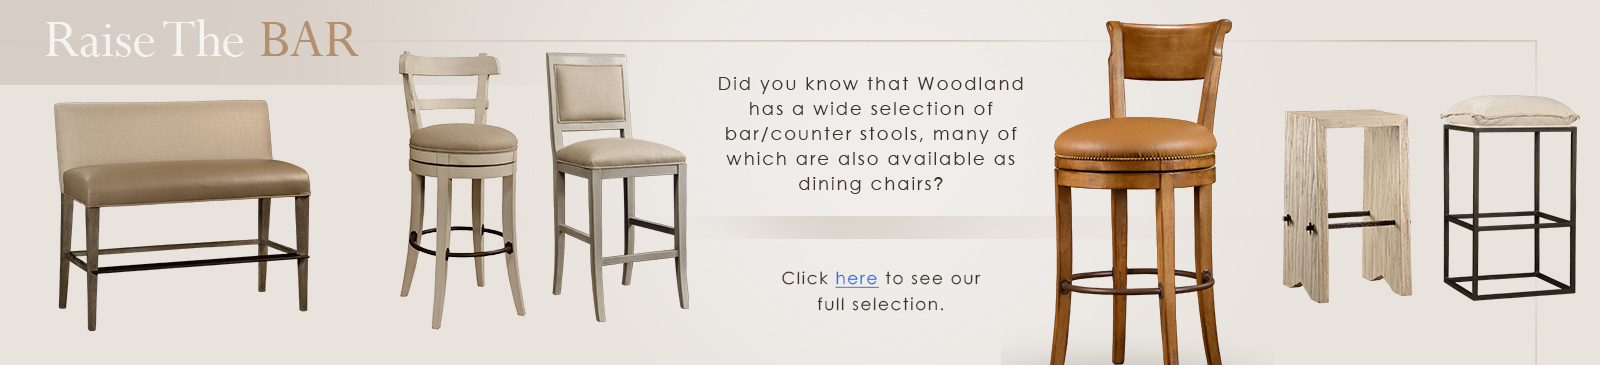 Traditional, transitional and contemporary bar and counter stools for the kitchen by Woodland furniture in Idaho Falls